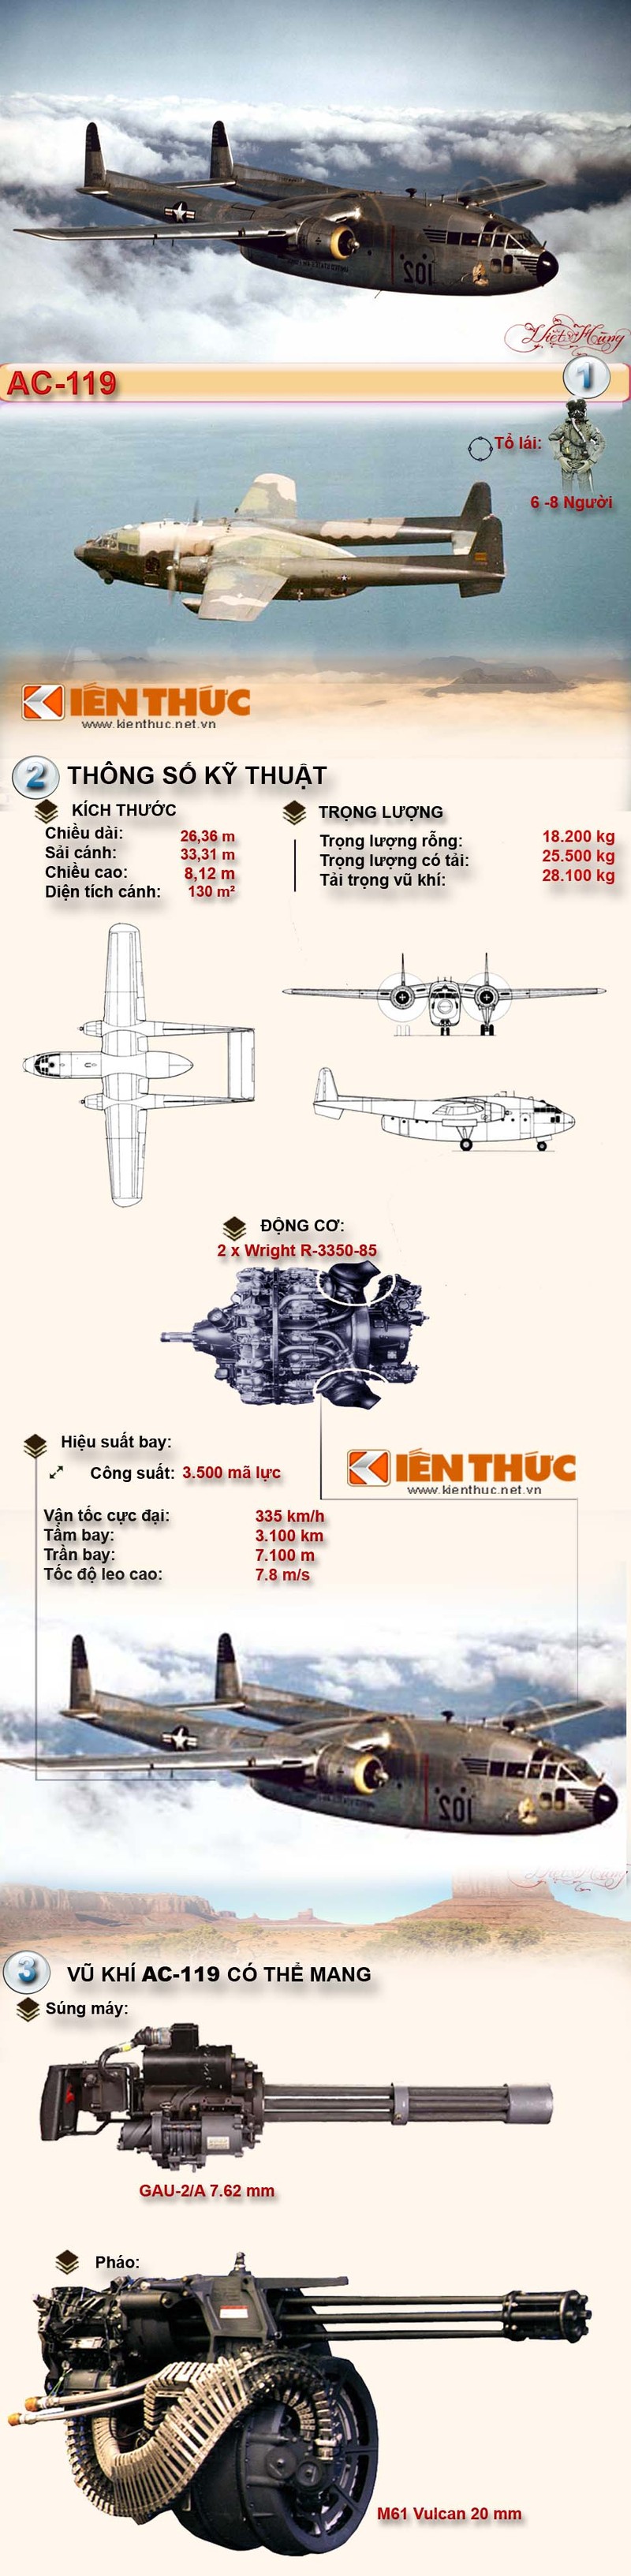 Infographic: “Ong chich” AC-119 trong Chien tranh VN